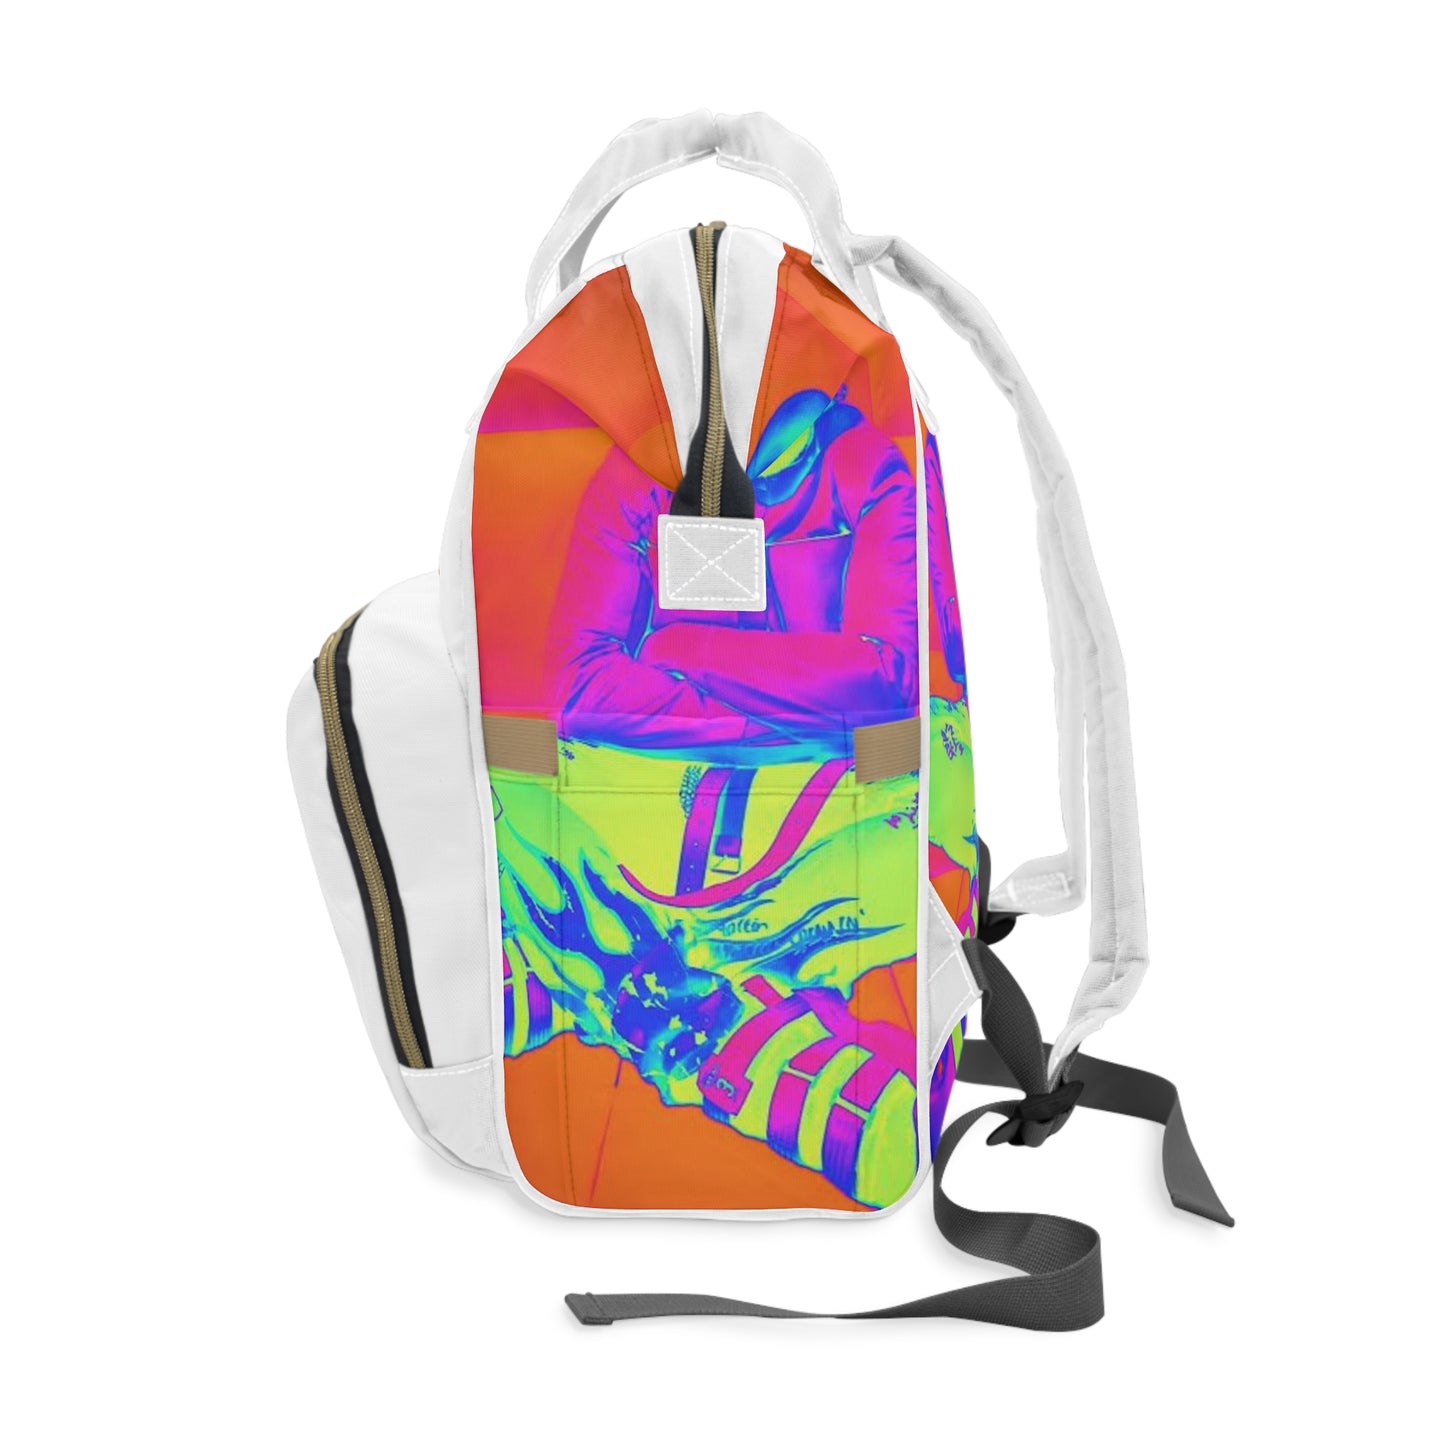 Diverse Insane For School! Multifunctional Diaper Backpack